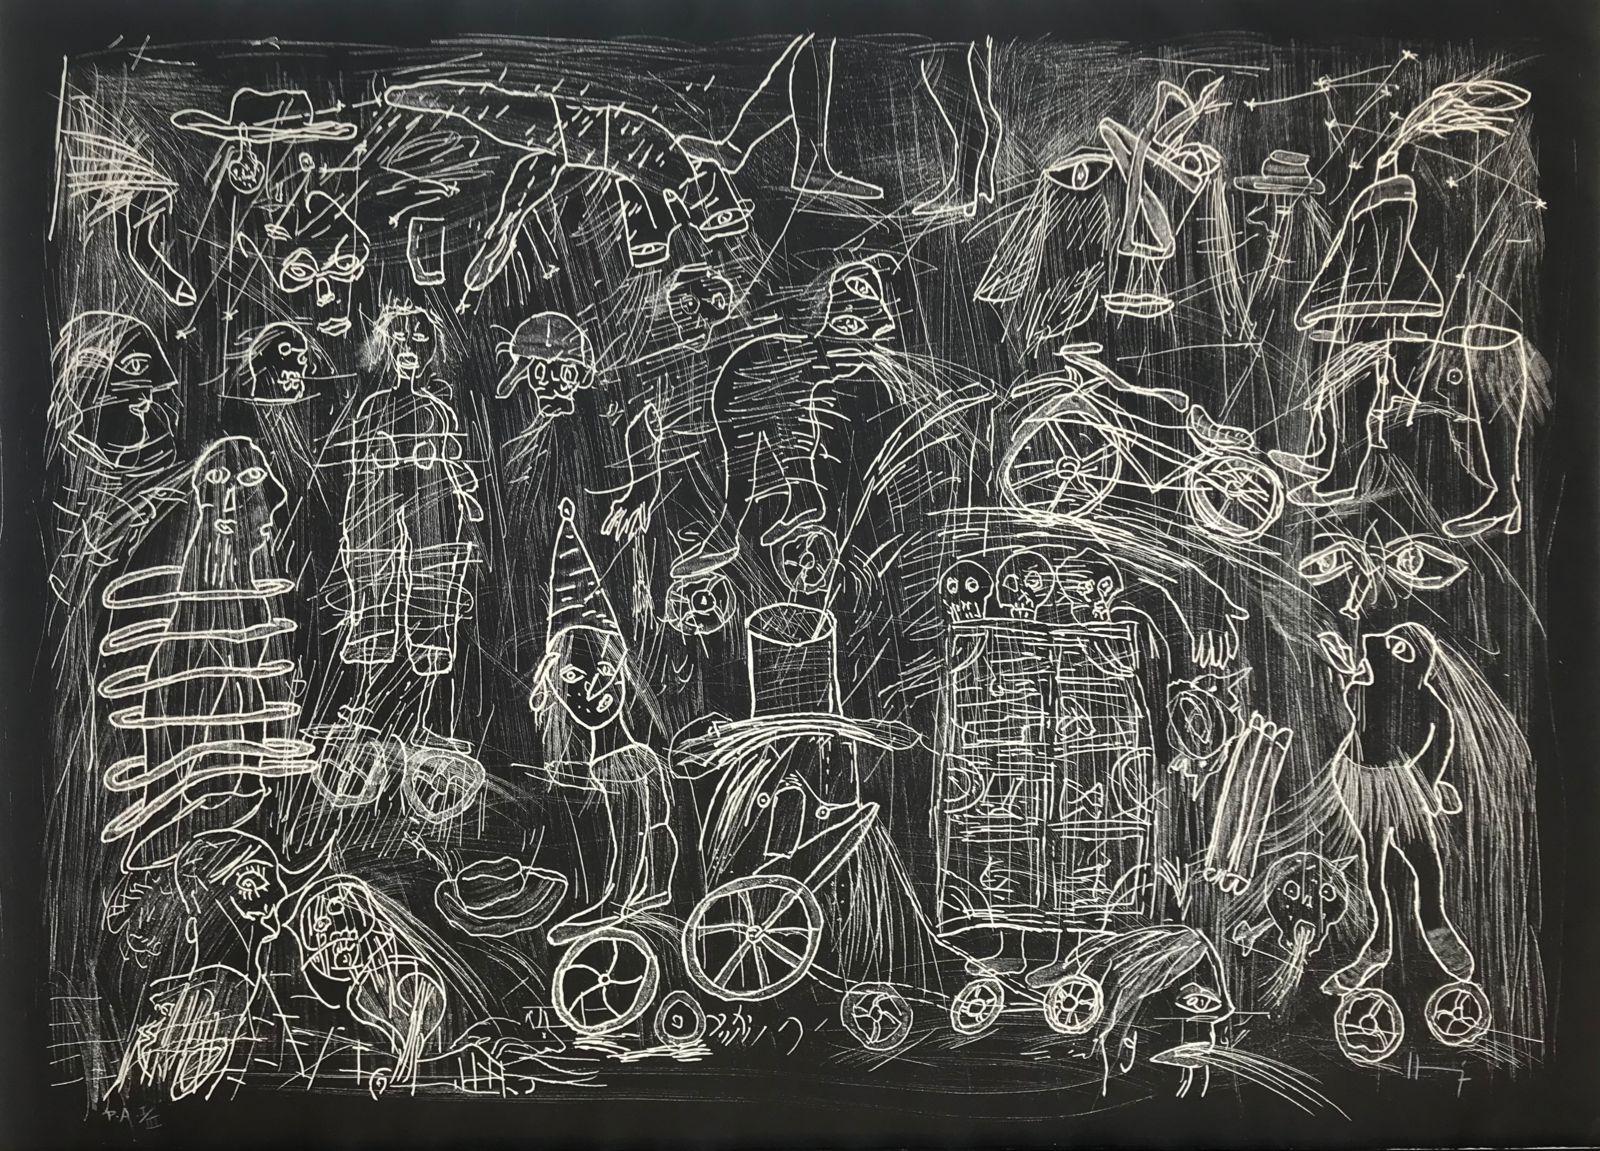 "Sergio Hernández (Mexico, 1957)
'Untitled', 2011
woodcut on paper
30 x 41.4 in. (76 x 105 cm.)
P.A I/III (Proof of Artist)
ID: HER-157-1"


















